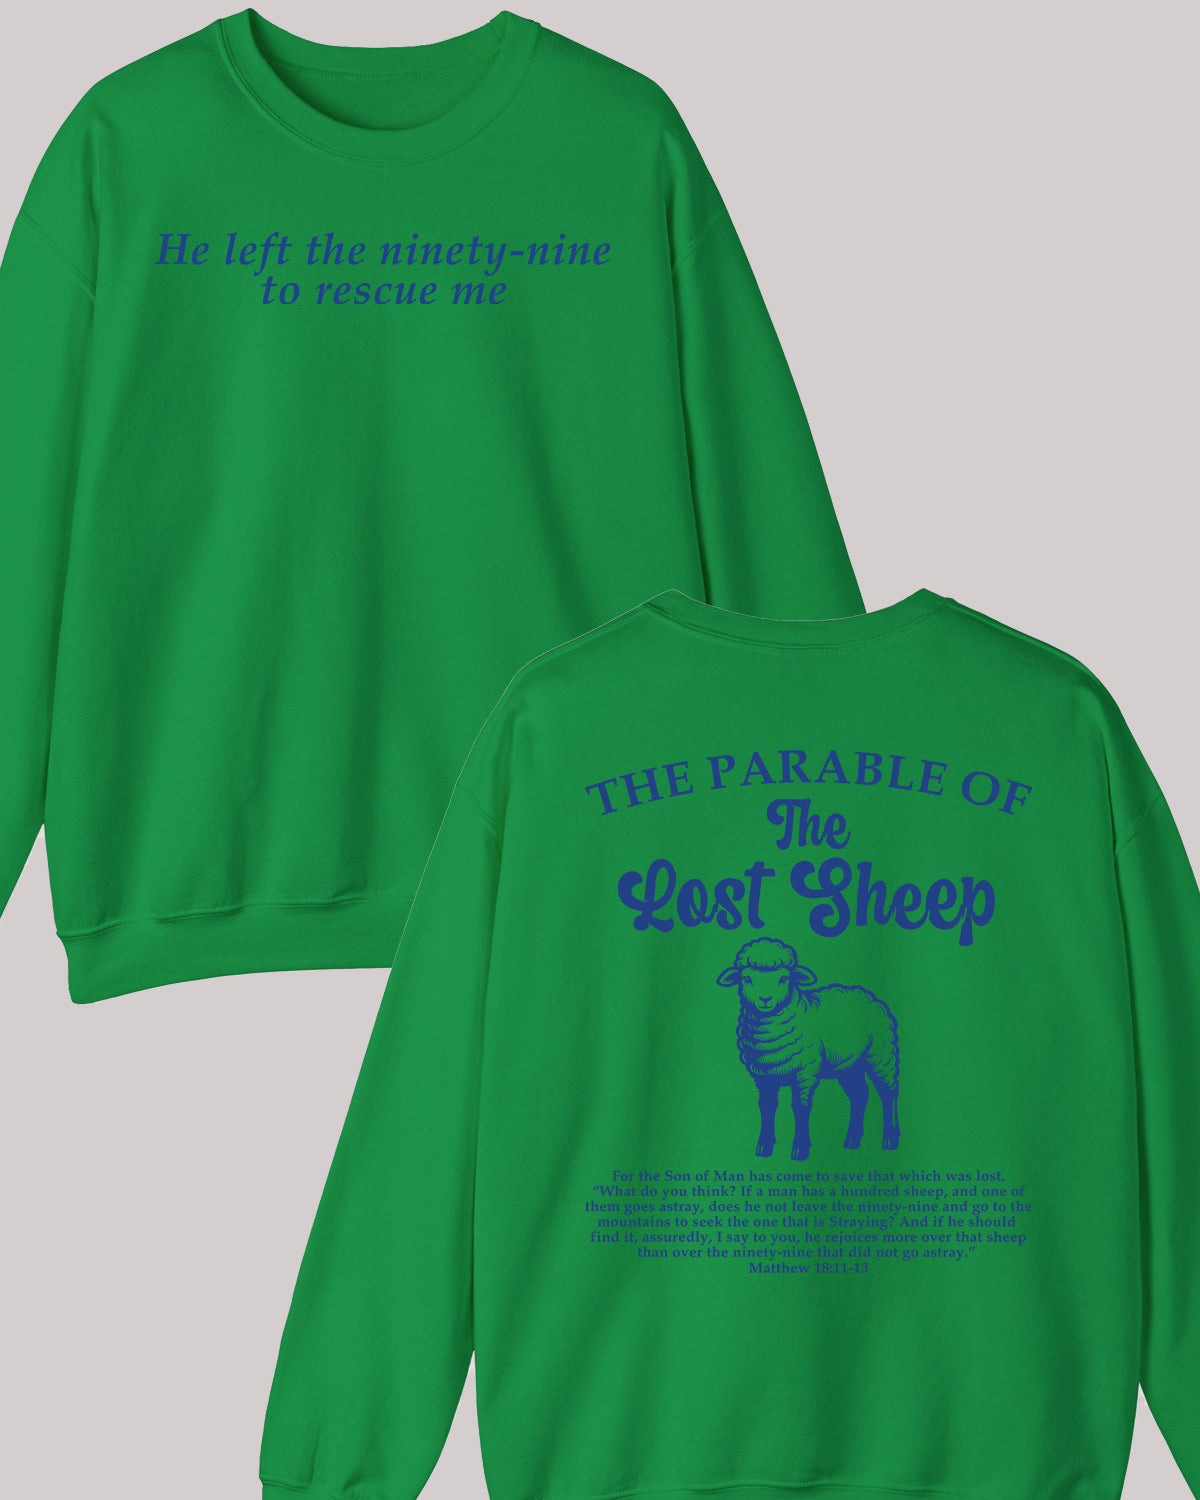 Parable of the Lost Sheep Bible Verse Front Back Sweatshirt